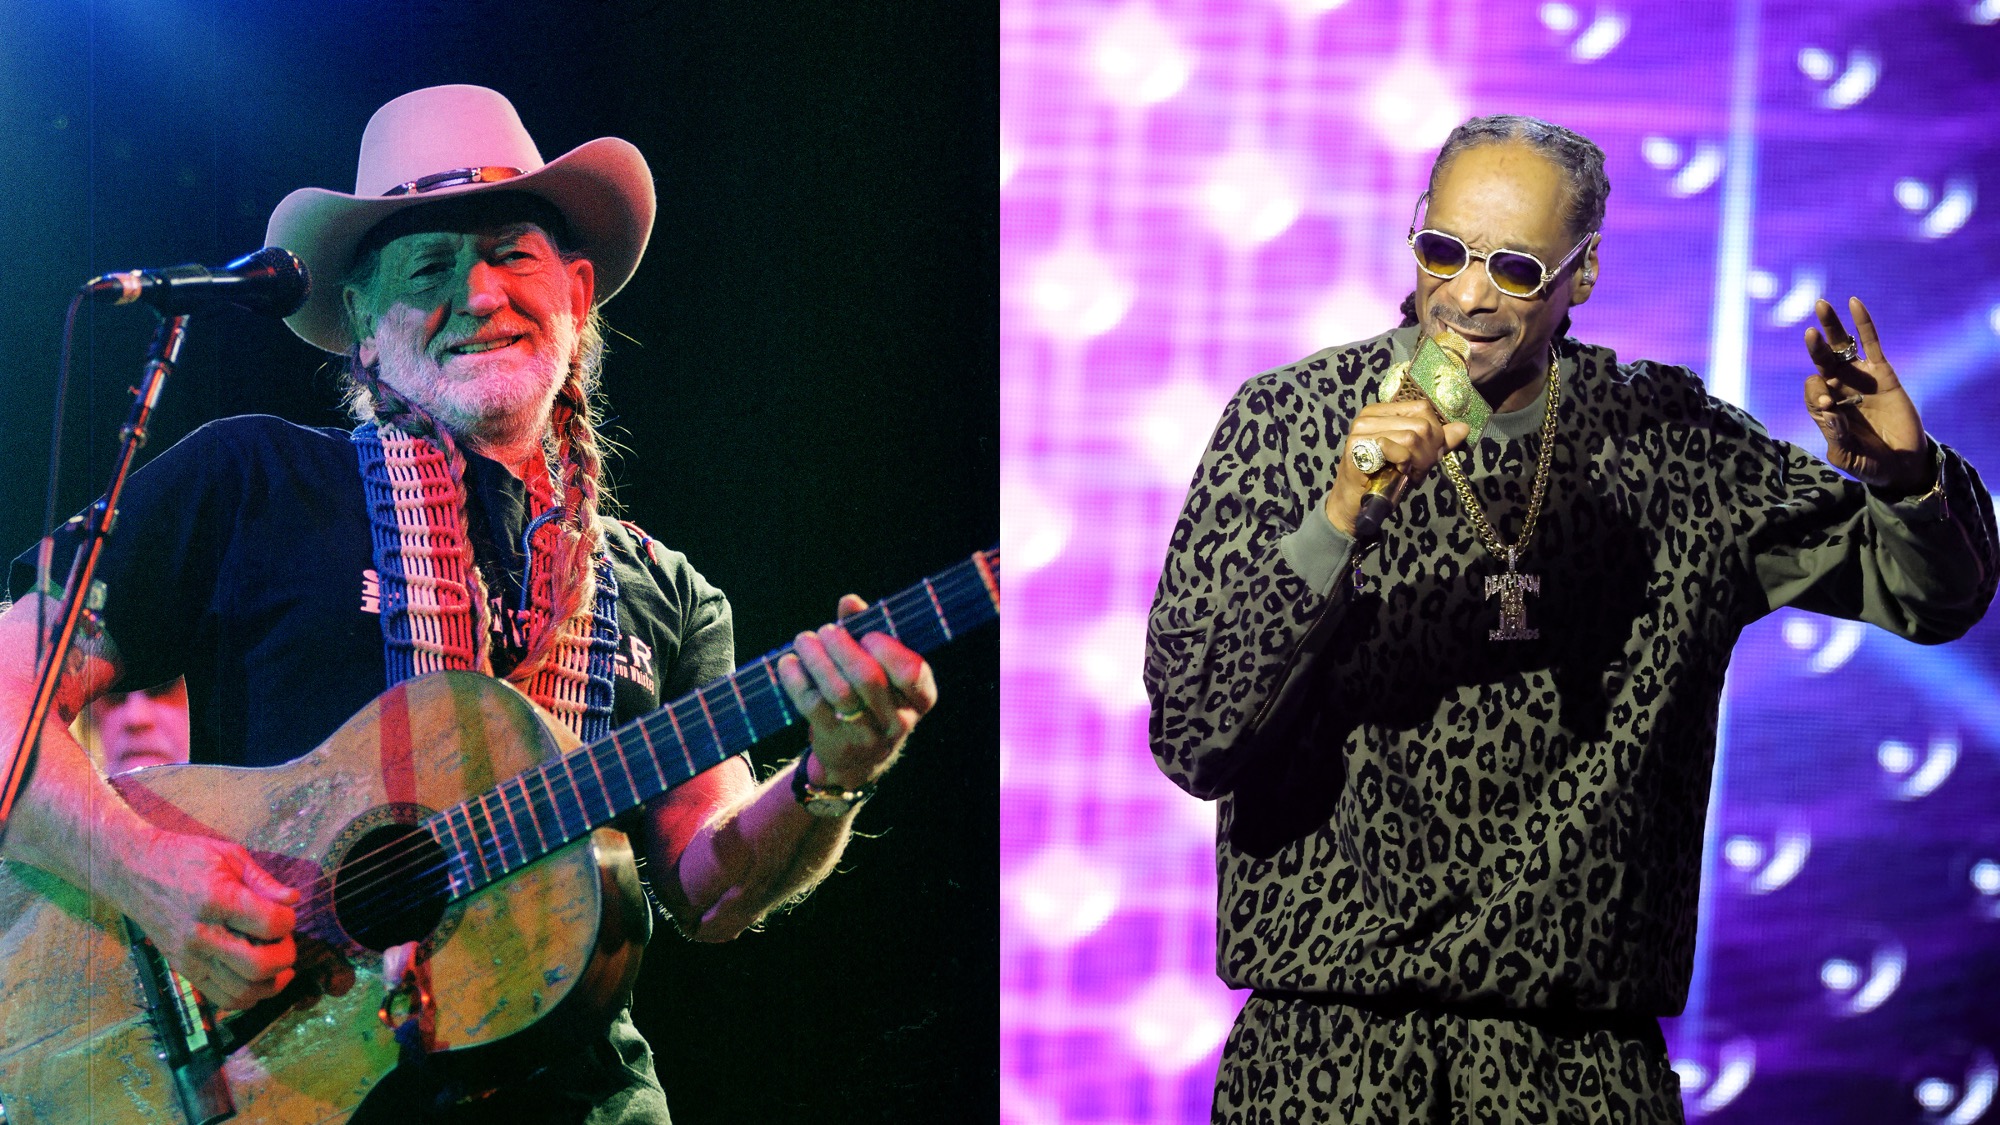 (L) Willie Nelson pictured performing at the Colorado State fair in Pueblo, Colorado on Circa 1996. (R) Snoop Dogg performs onstage during Recording Academy Honors Presented by the Black Music Collective at Hollywood Palladium on February 02, 2023.